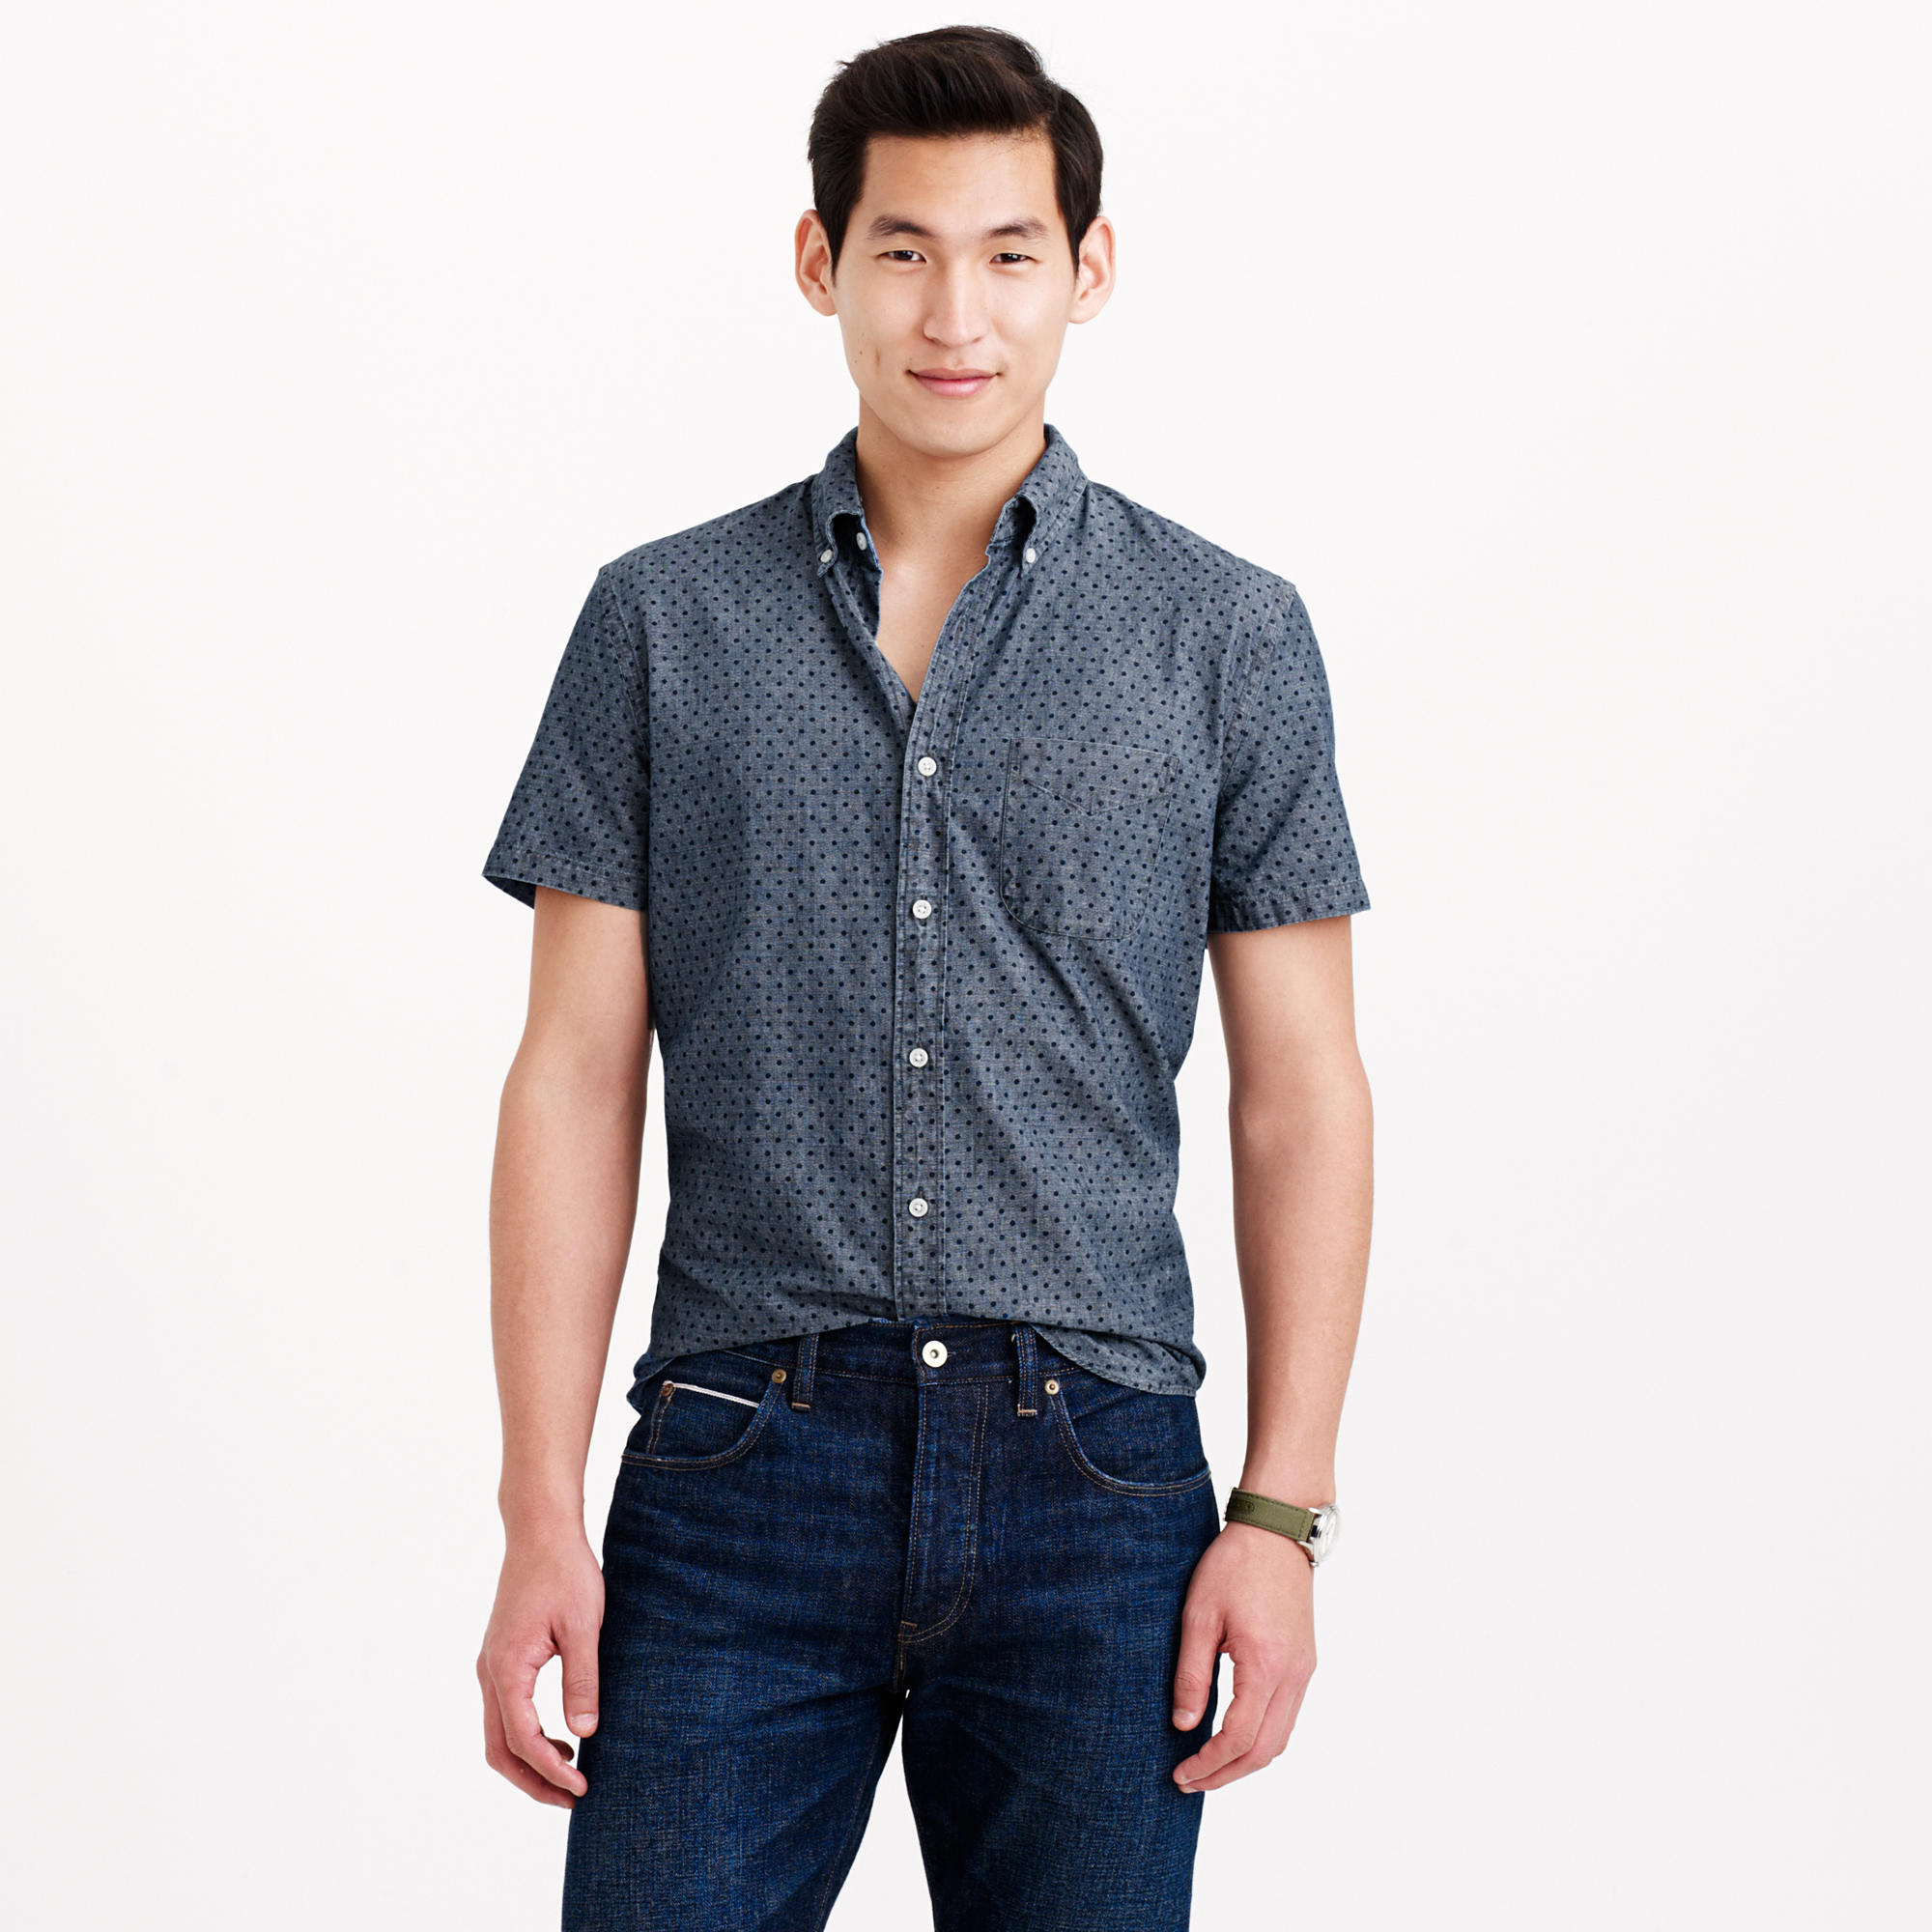 J.Crew Cotton Chambray Short-sleeve Shirt In Classic Navy Dot in Blue for  Men - Lyst